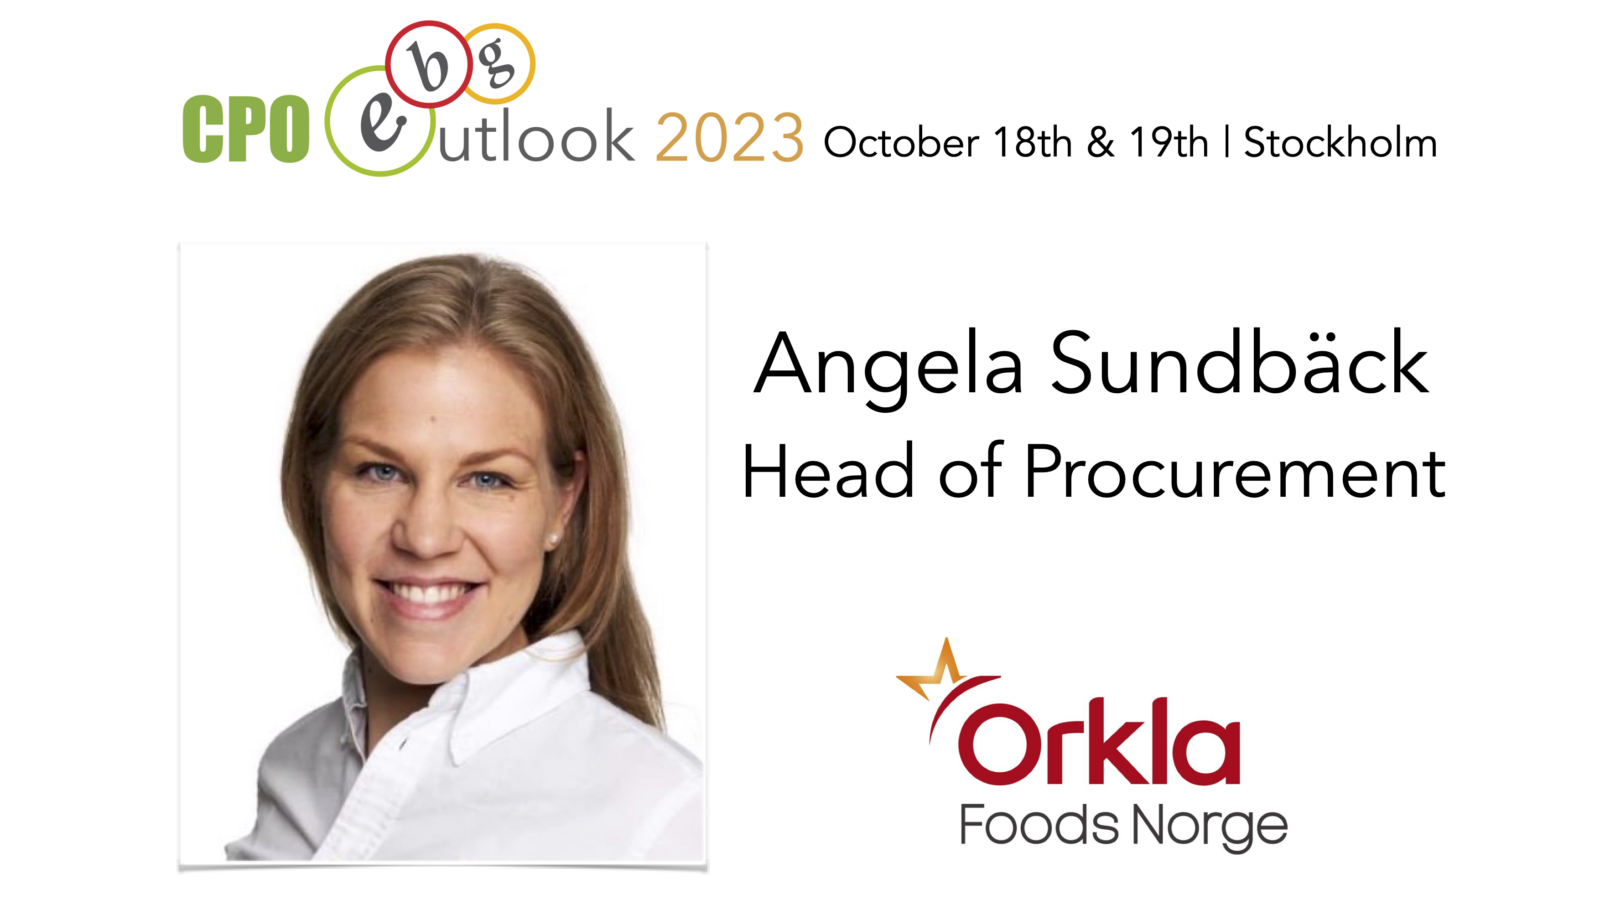 Orkla Foods Norge join CPO Outlook 2023